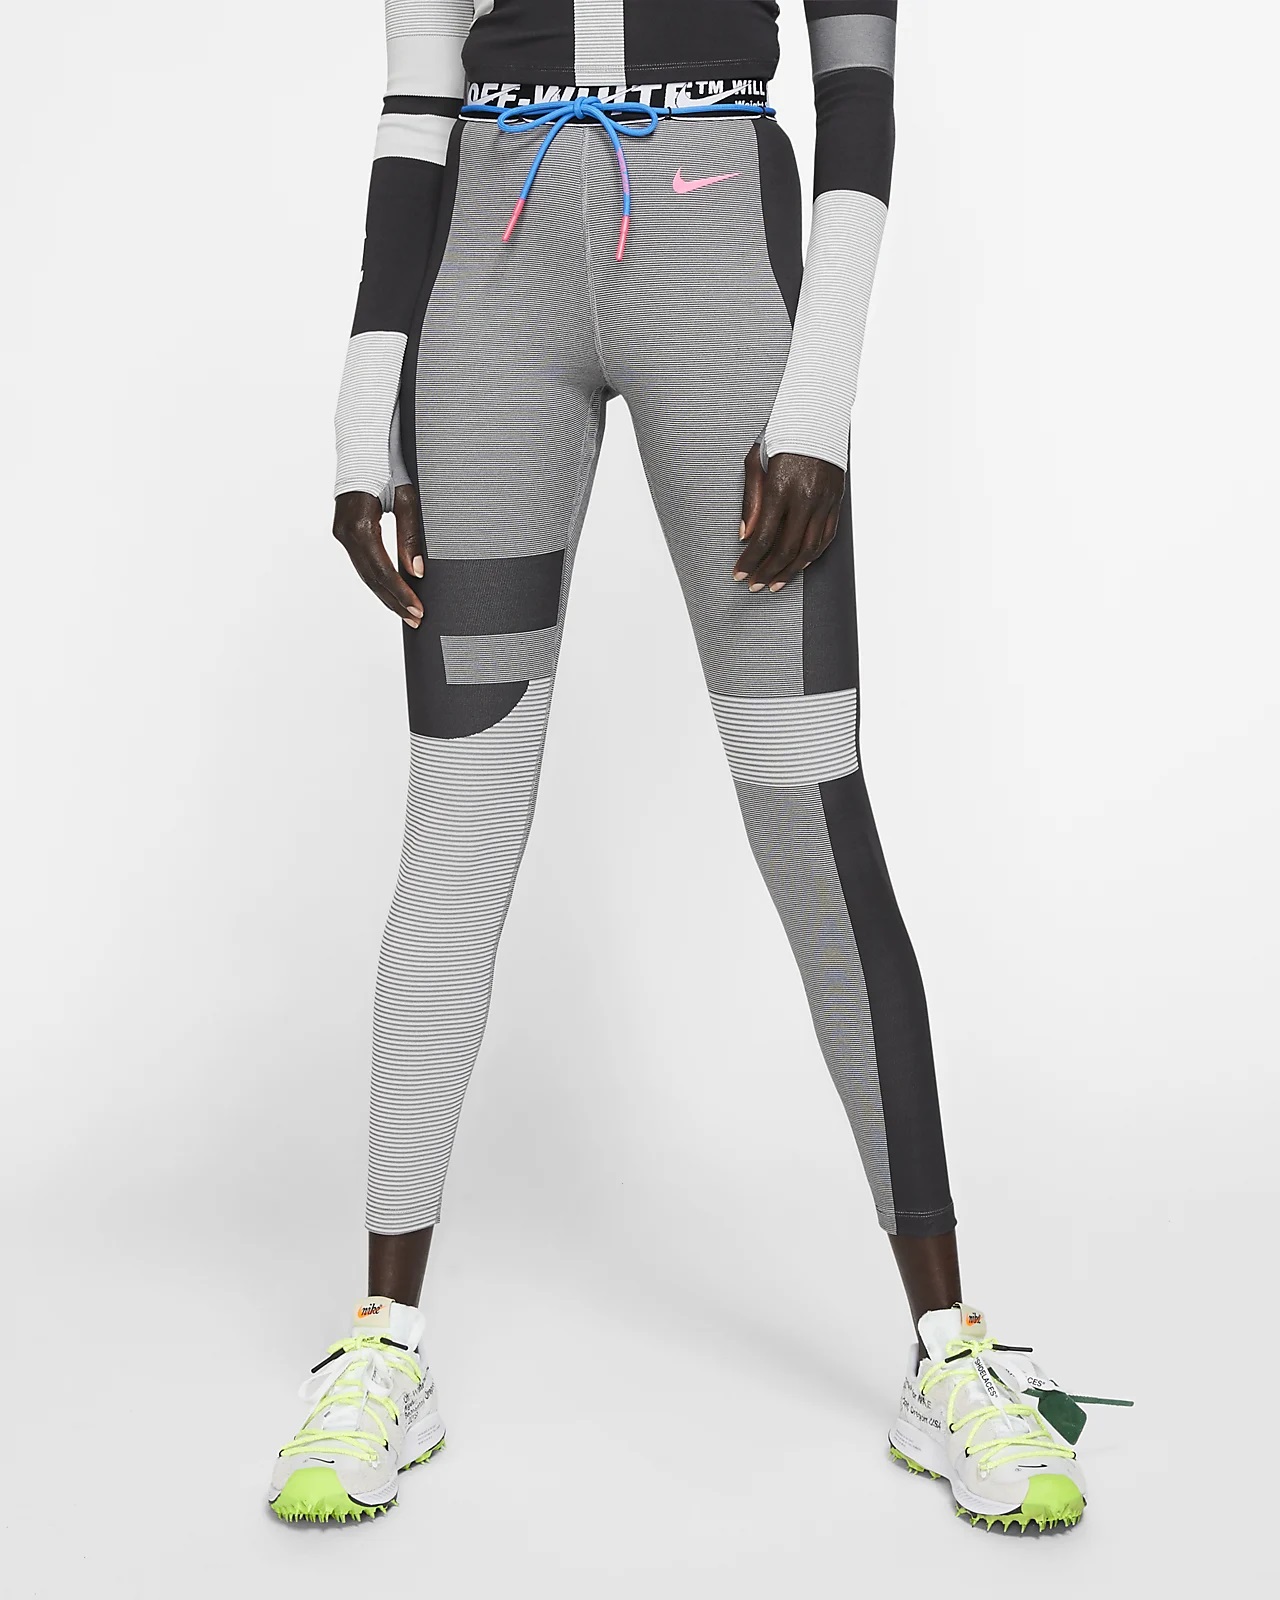 off-white-nike-tights-BV8043-010